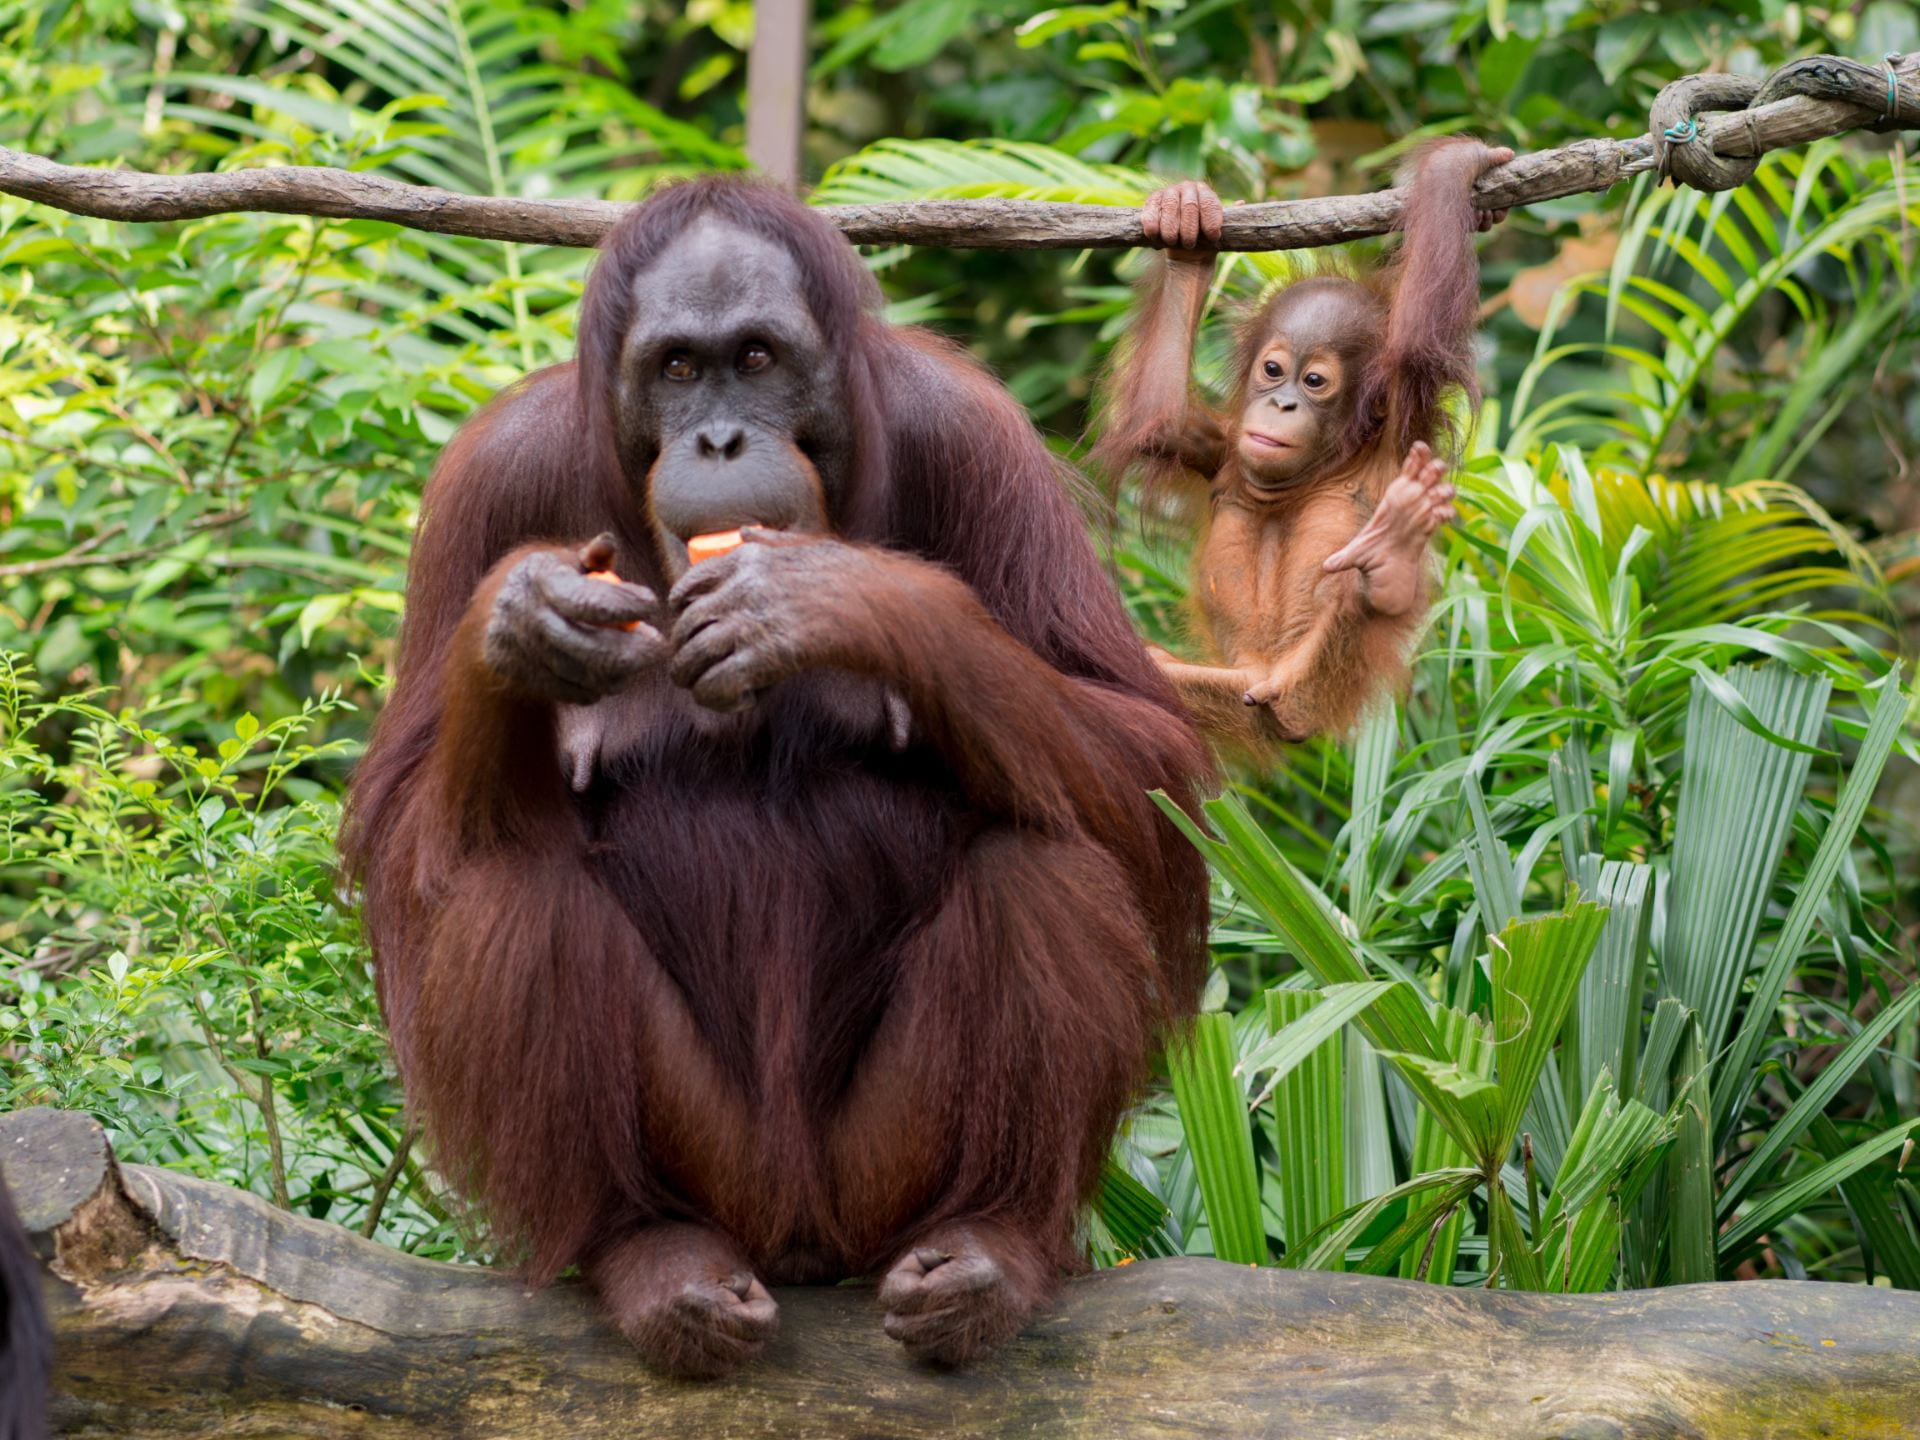 [A mother orangutan sits in the foreground eating a piece of fruit, while her young offspring swings on a branch behind her.]